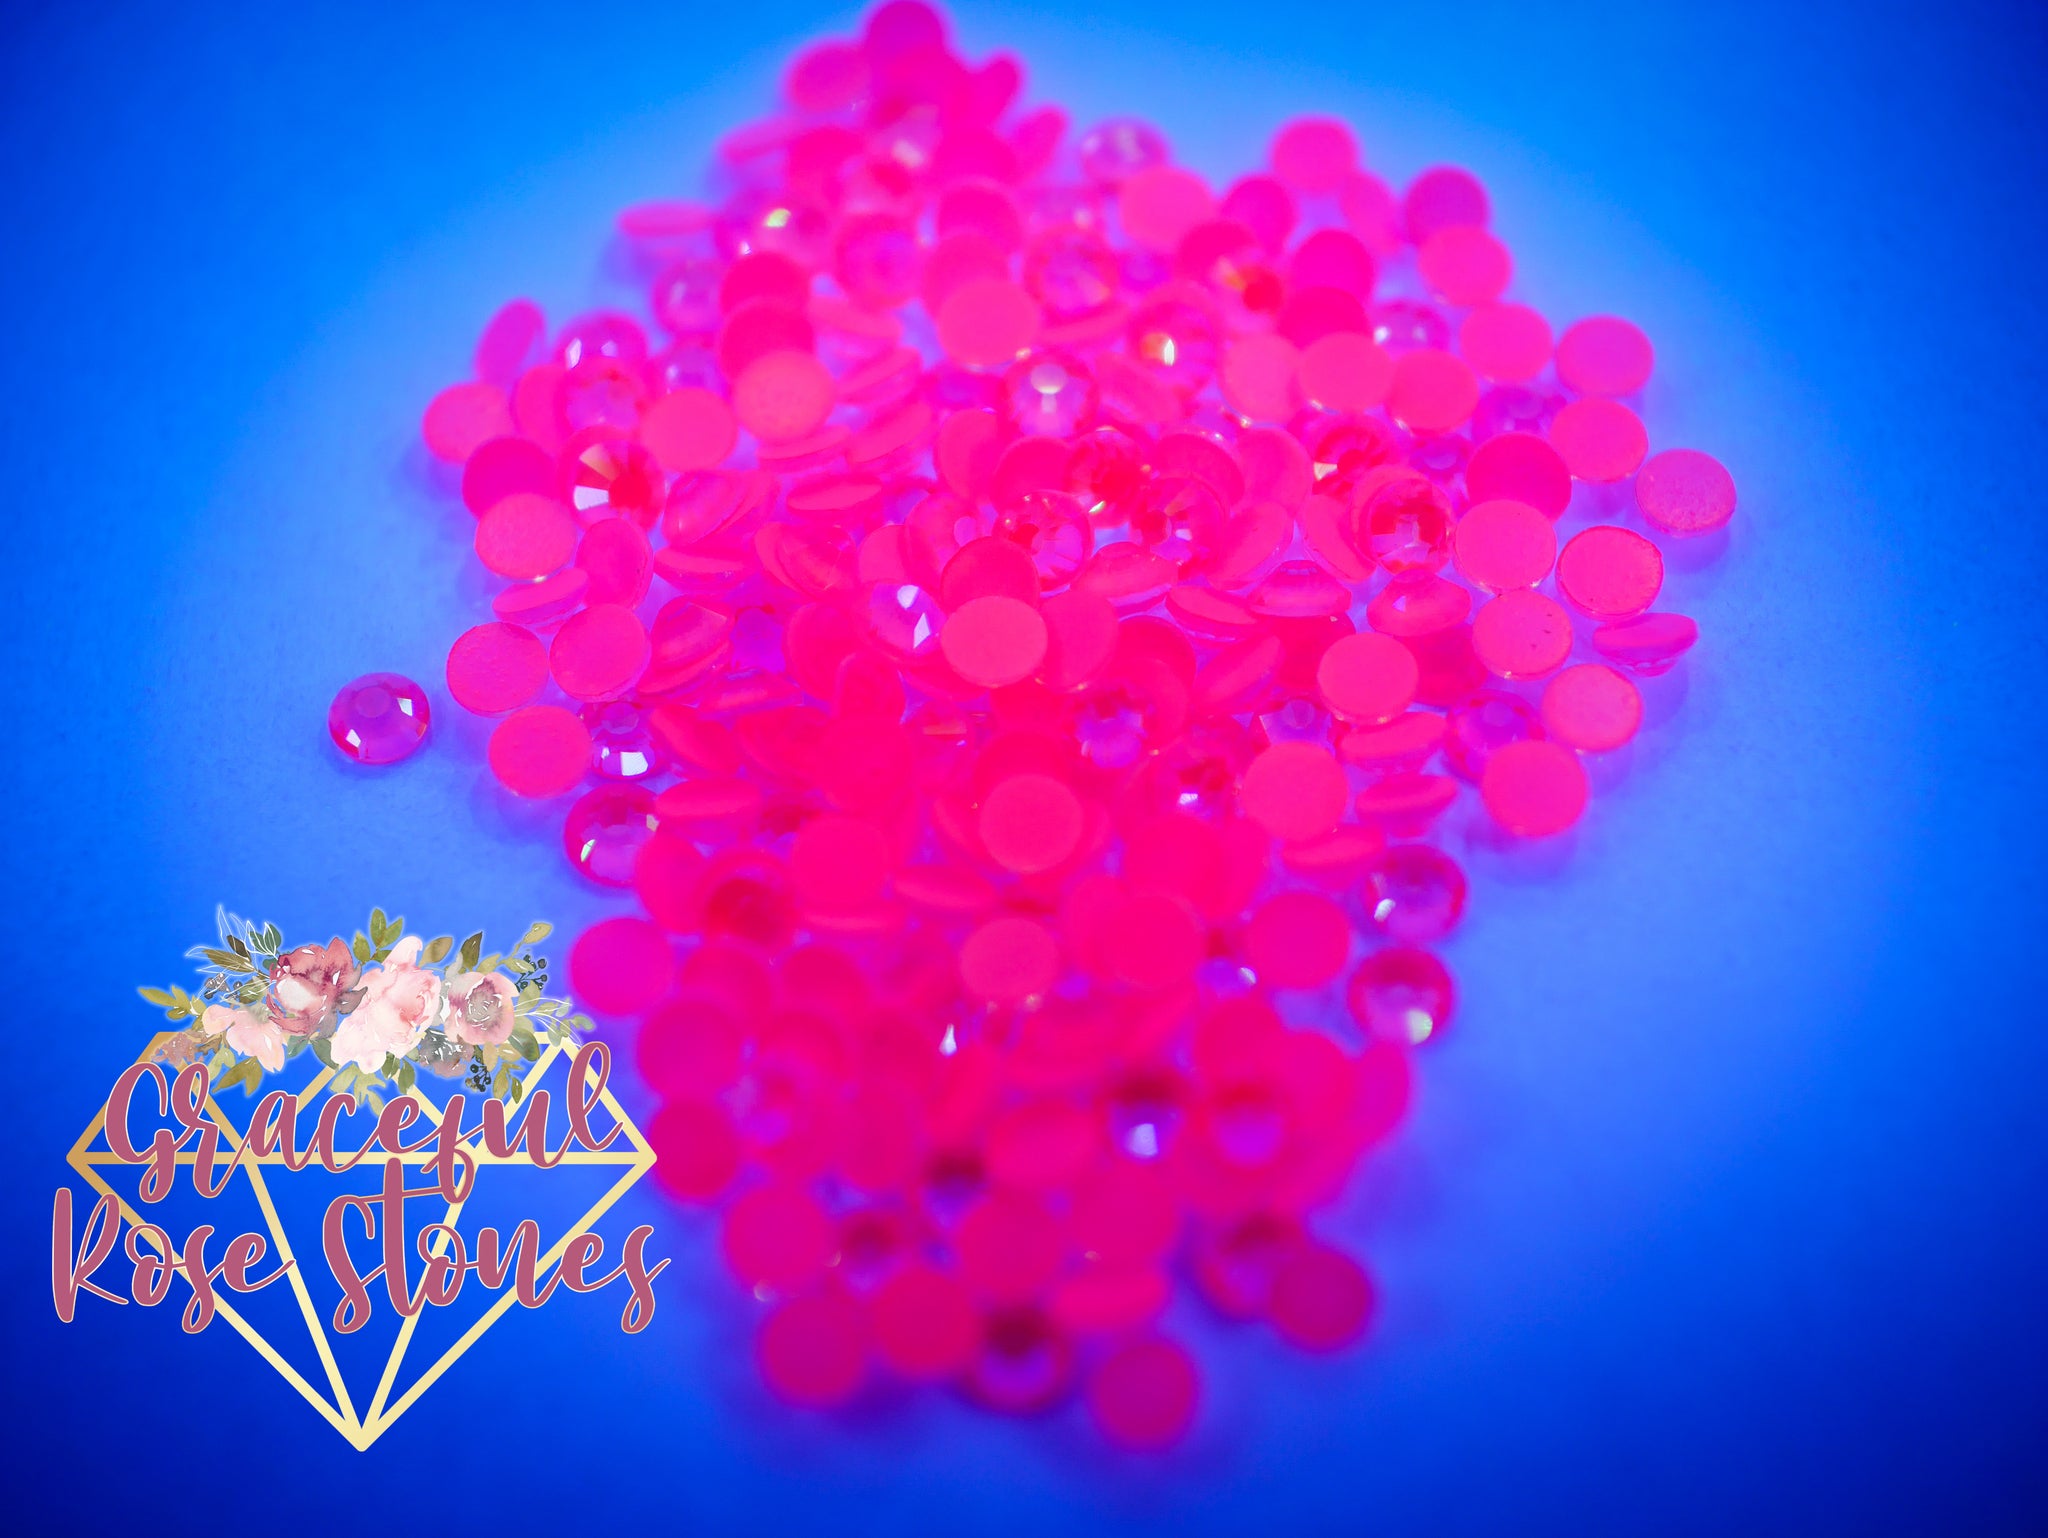 Barbie Pink AB Jelly Rhinestones – The Bling Dispensary